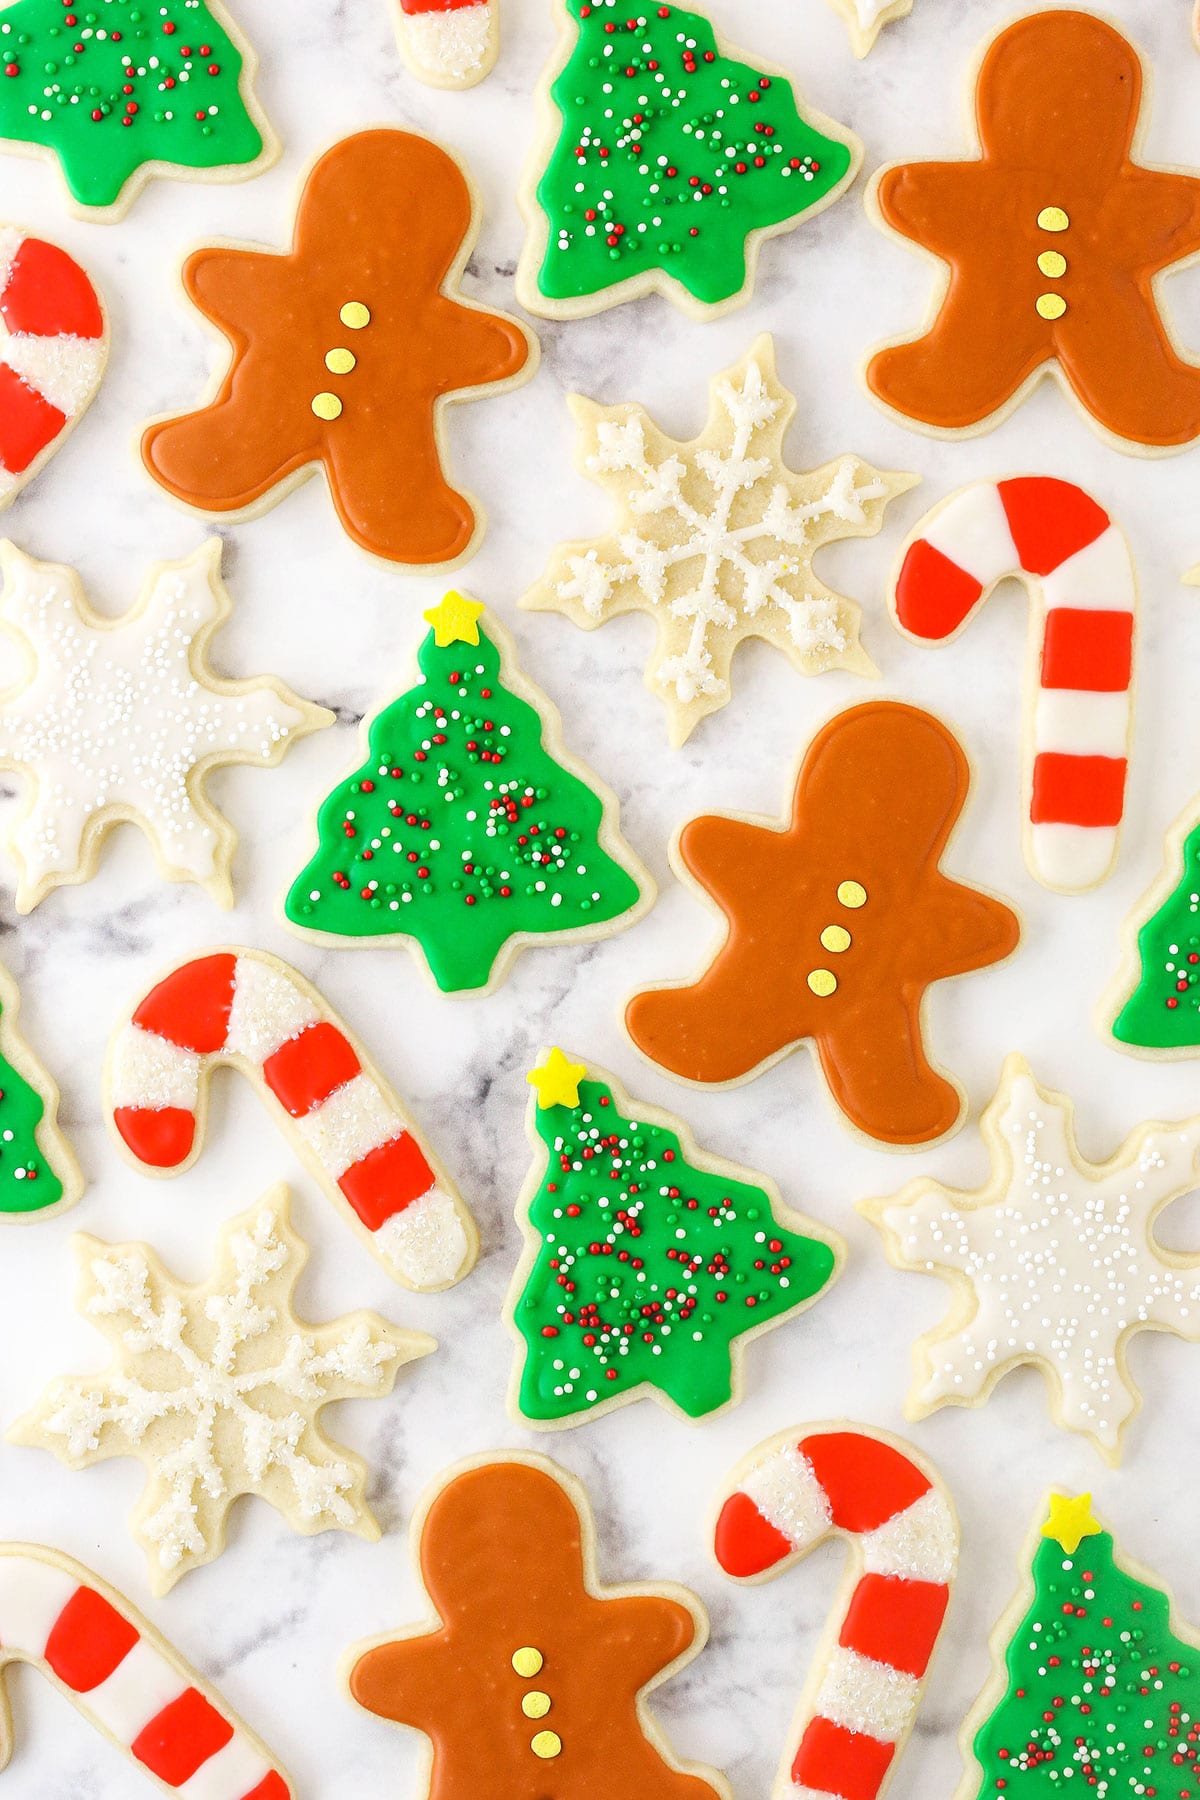 Frosted sugar cookies cut into various Christmas-themed shapes.